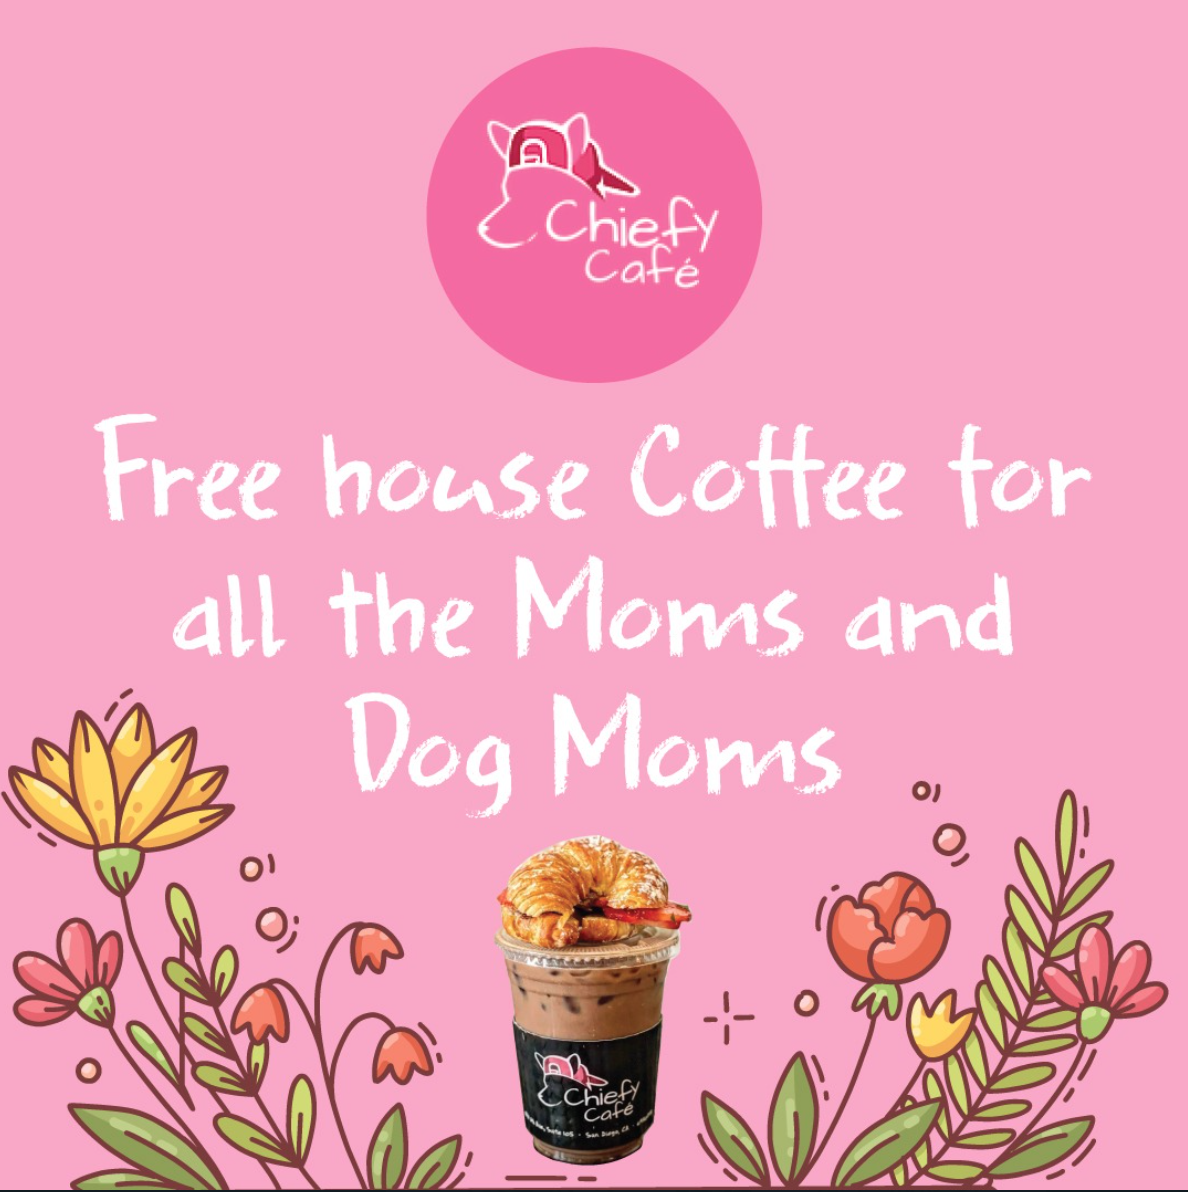 Calling all Moms!